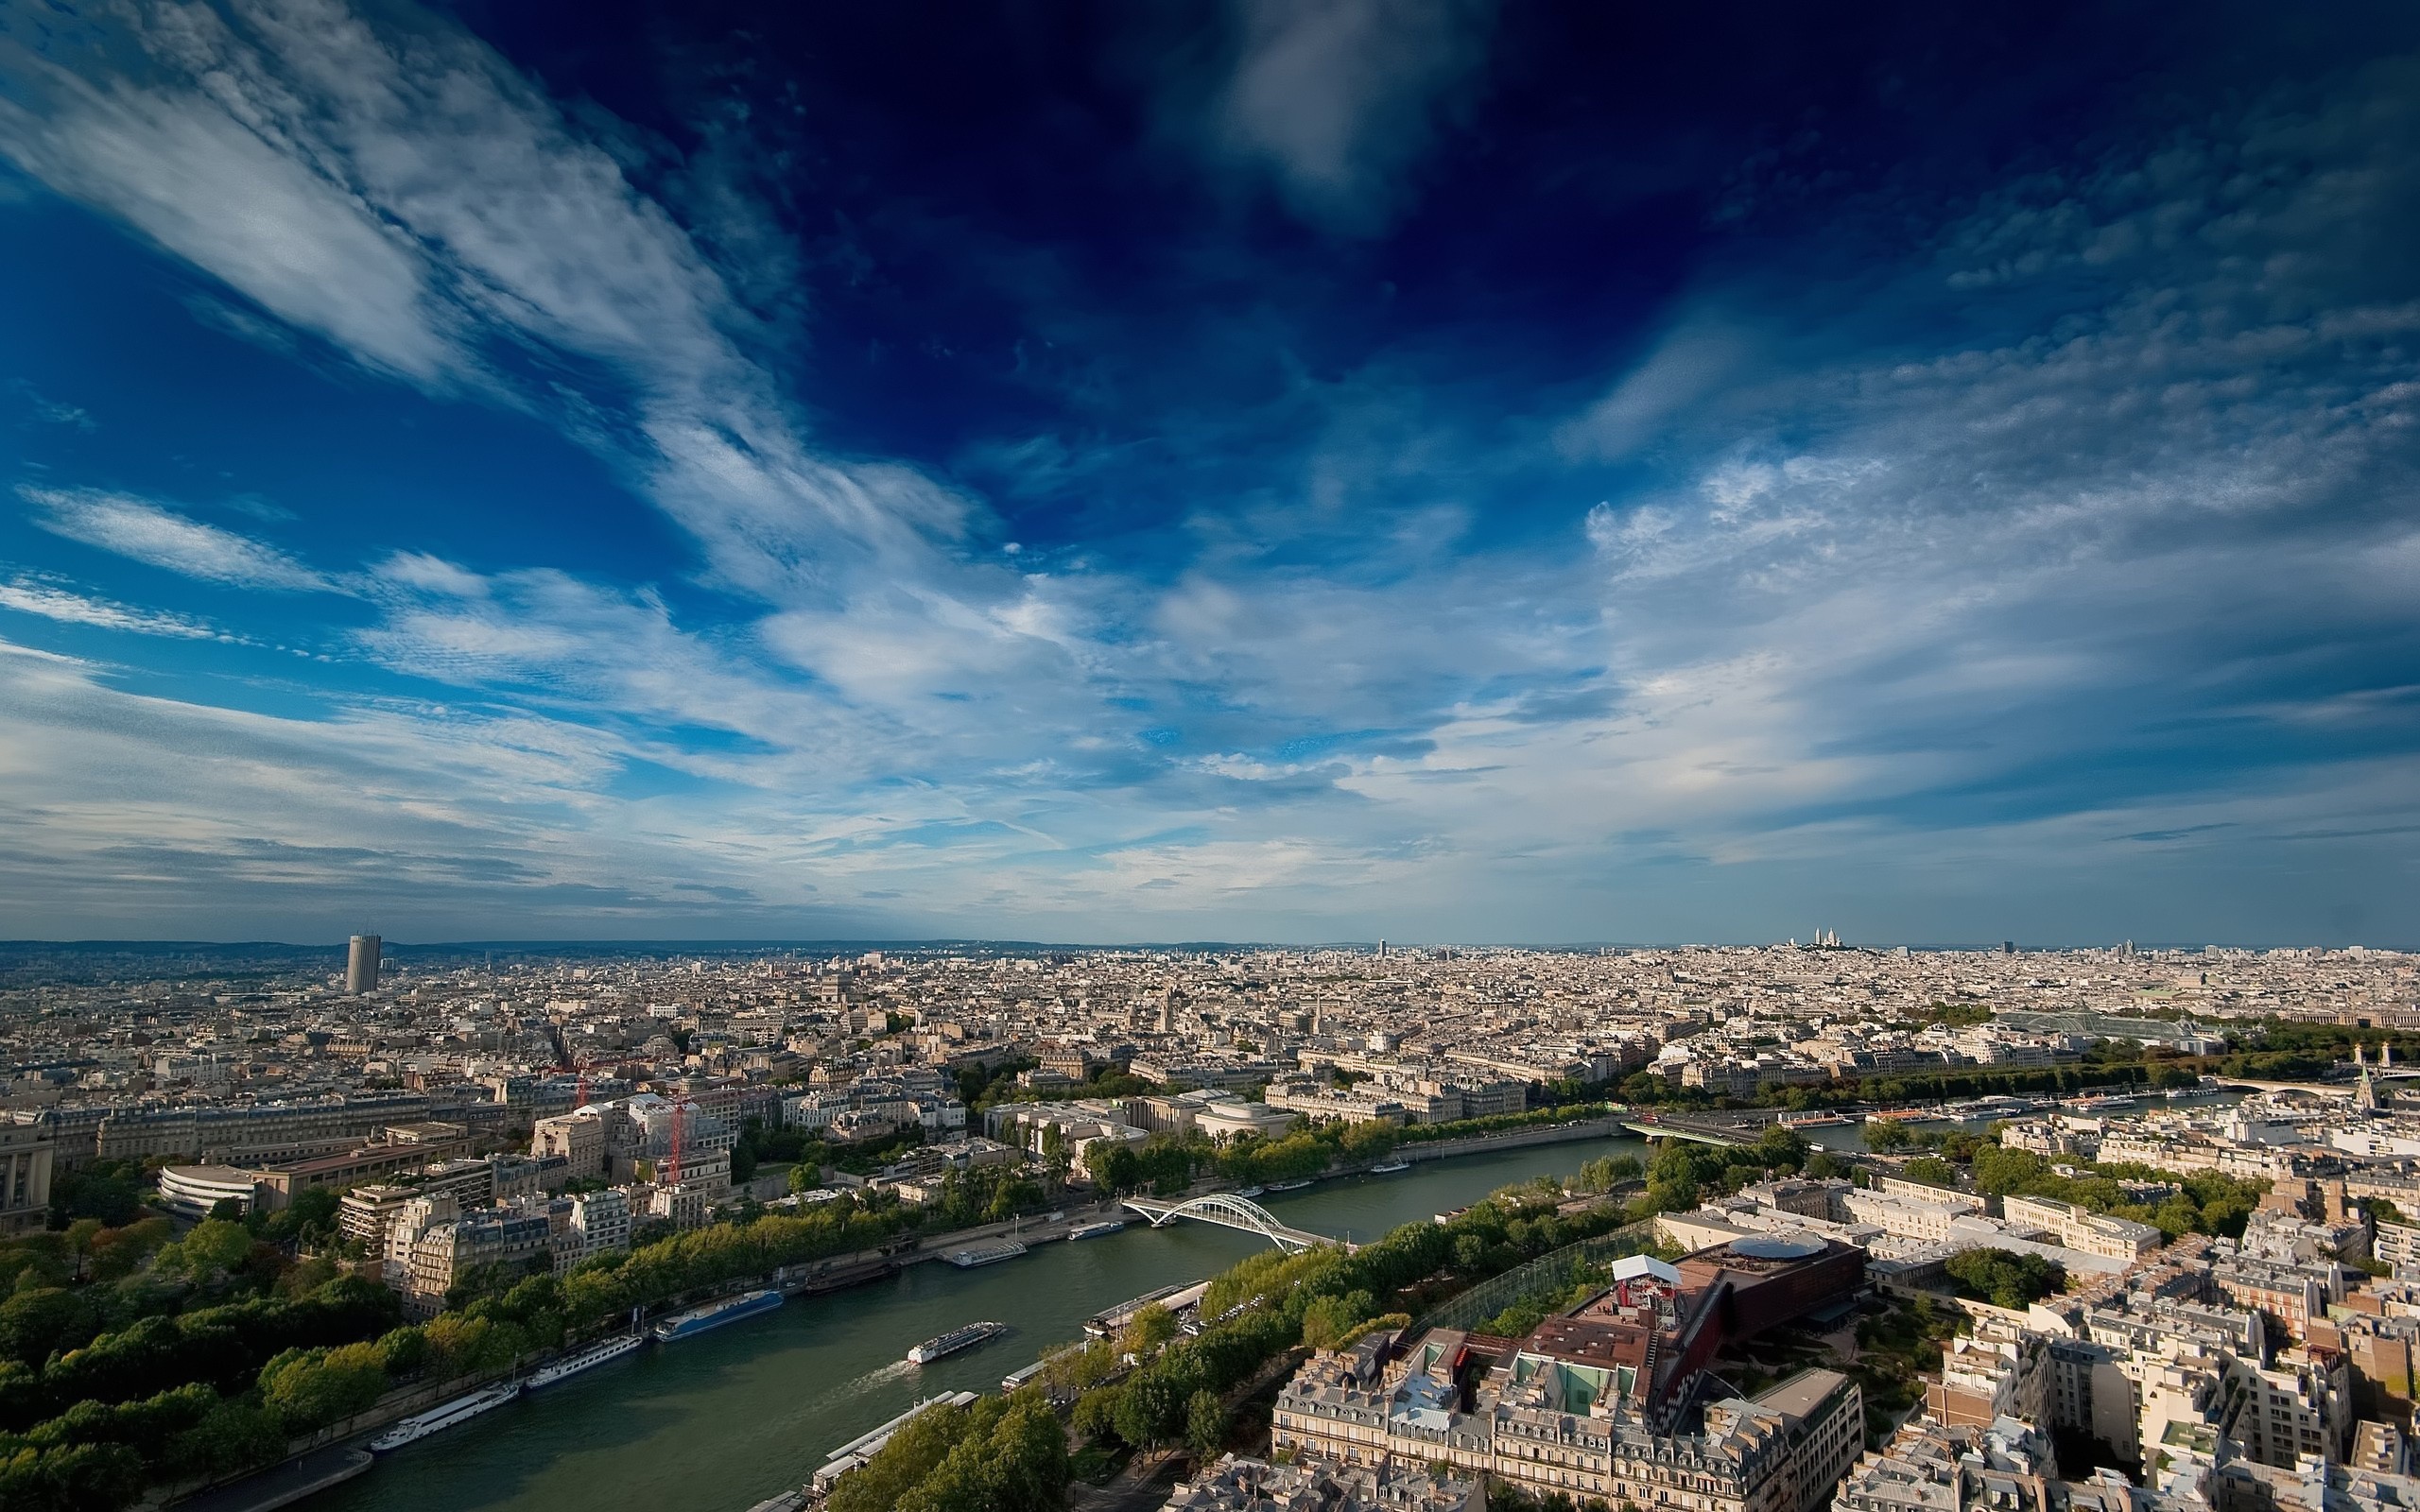 Paris skyline with iconic landmarks and beautiful architecture.